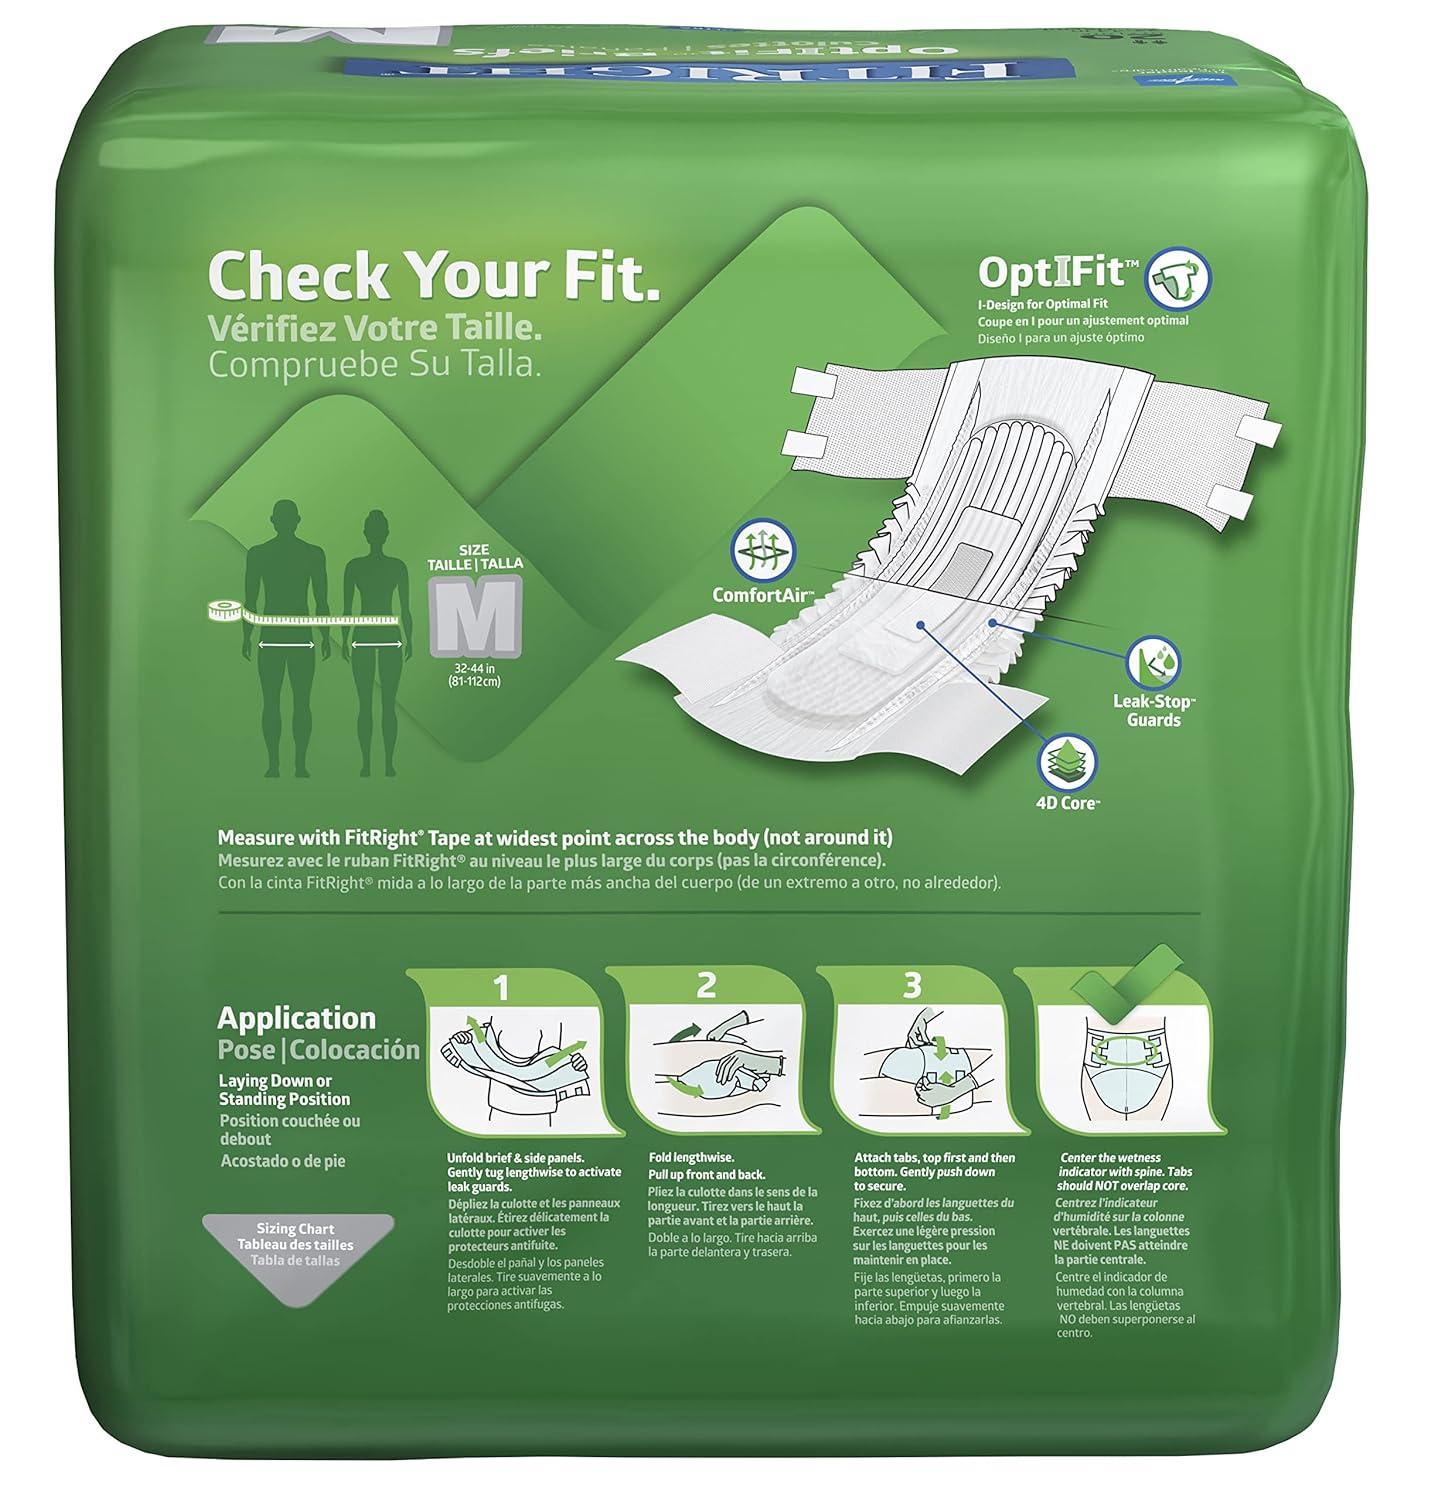 FitRight Ultra Adult Diapers Disposable Incontinence Briefs with Tabs Heavy  Absorbency Medium 32-42 4 packs of 20 (80 total) Case of 80 Medium (Pack  of 80)